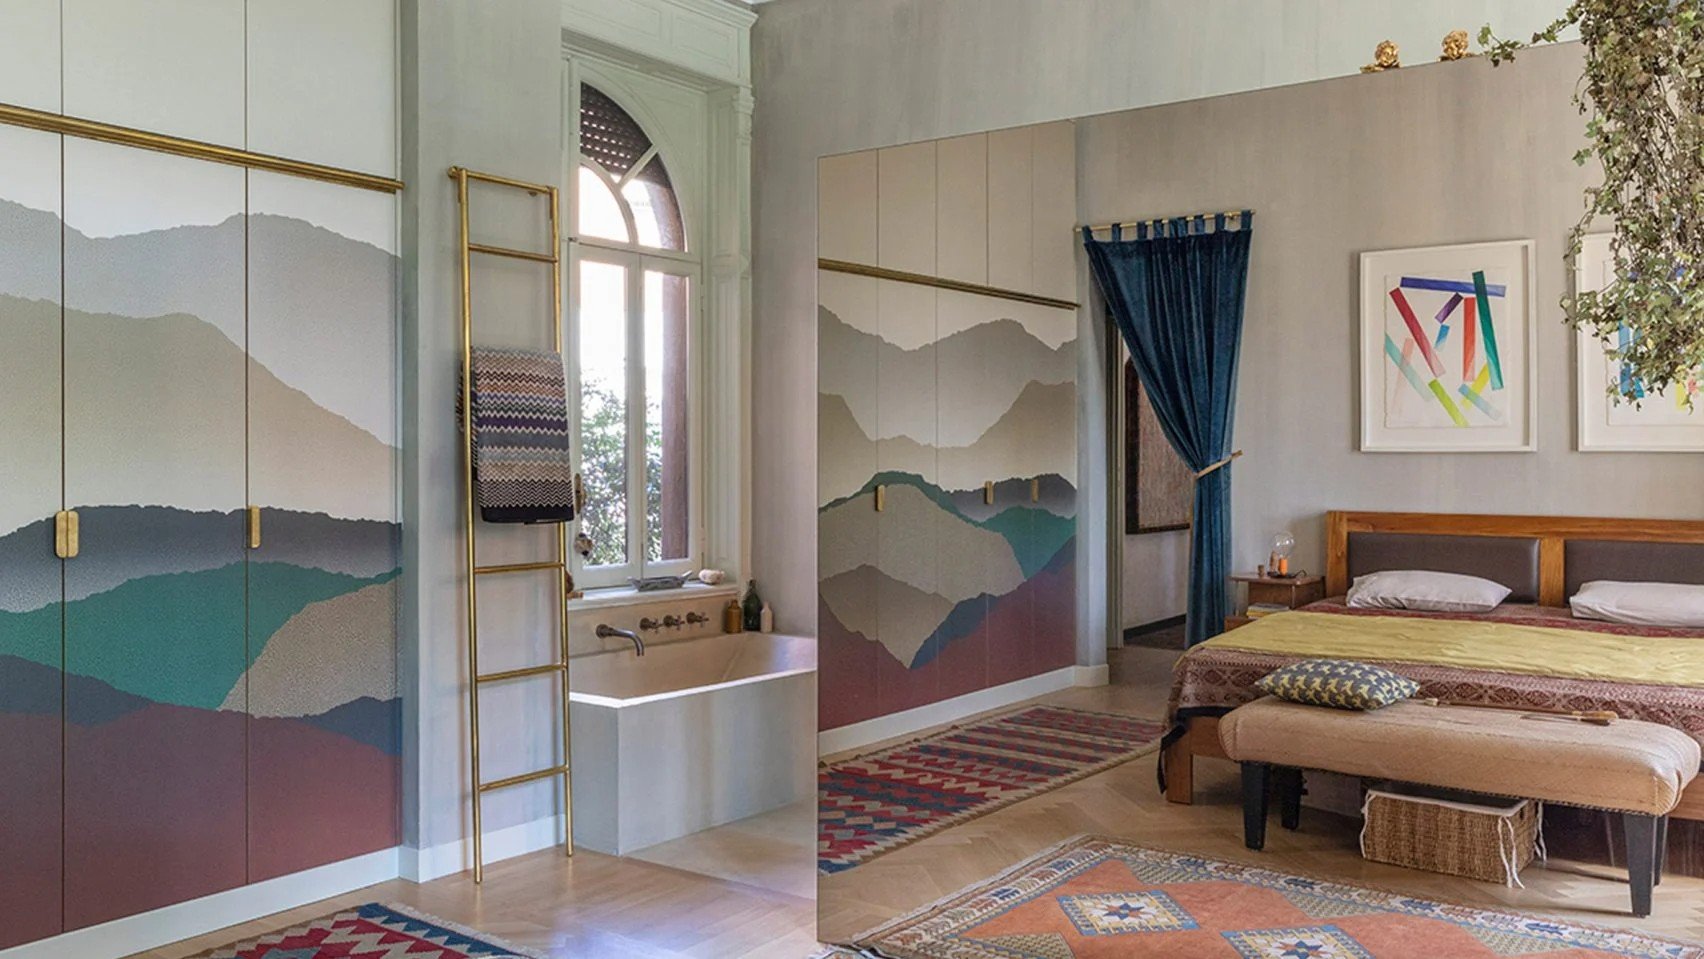 Styles and eras mingle inside "unfinished" diplomat's home in Rome by 02A